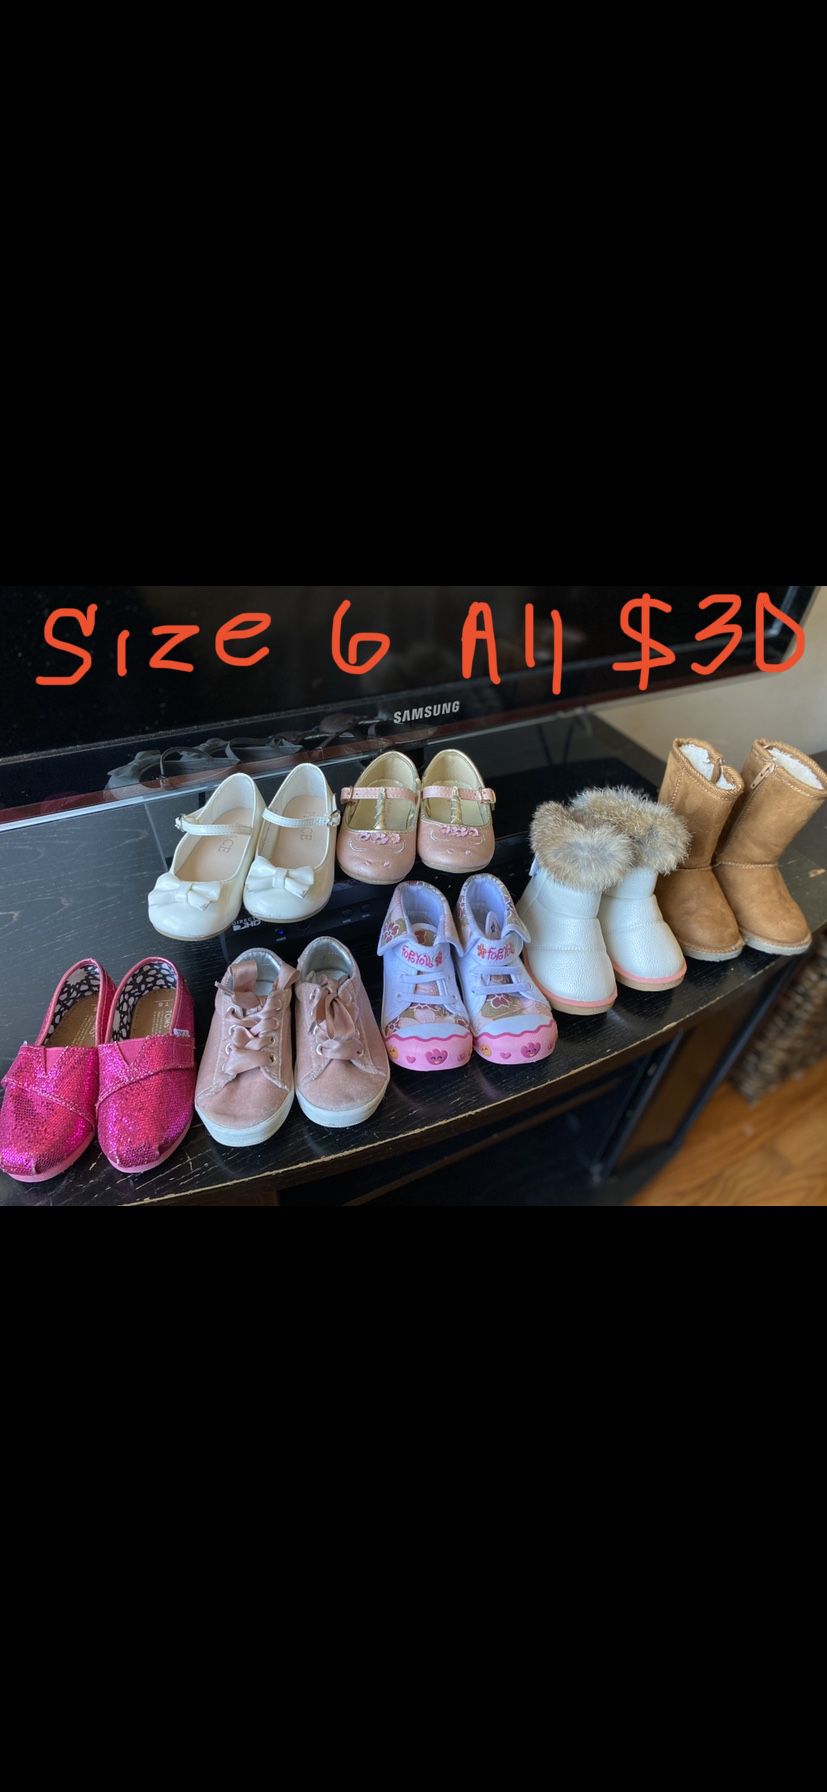 Baby girl toddler size 6 6T shoes flats boots $30